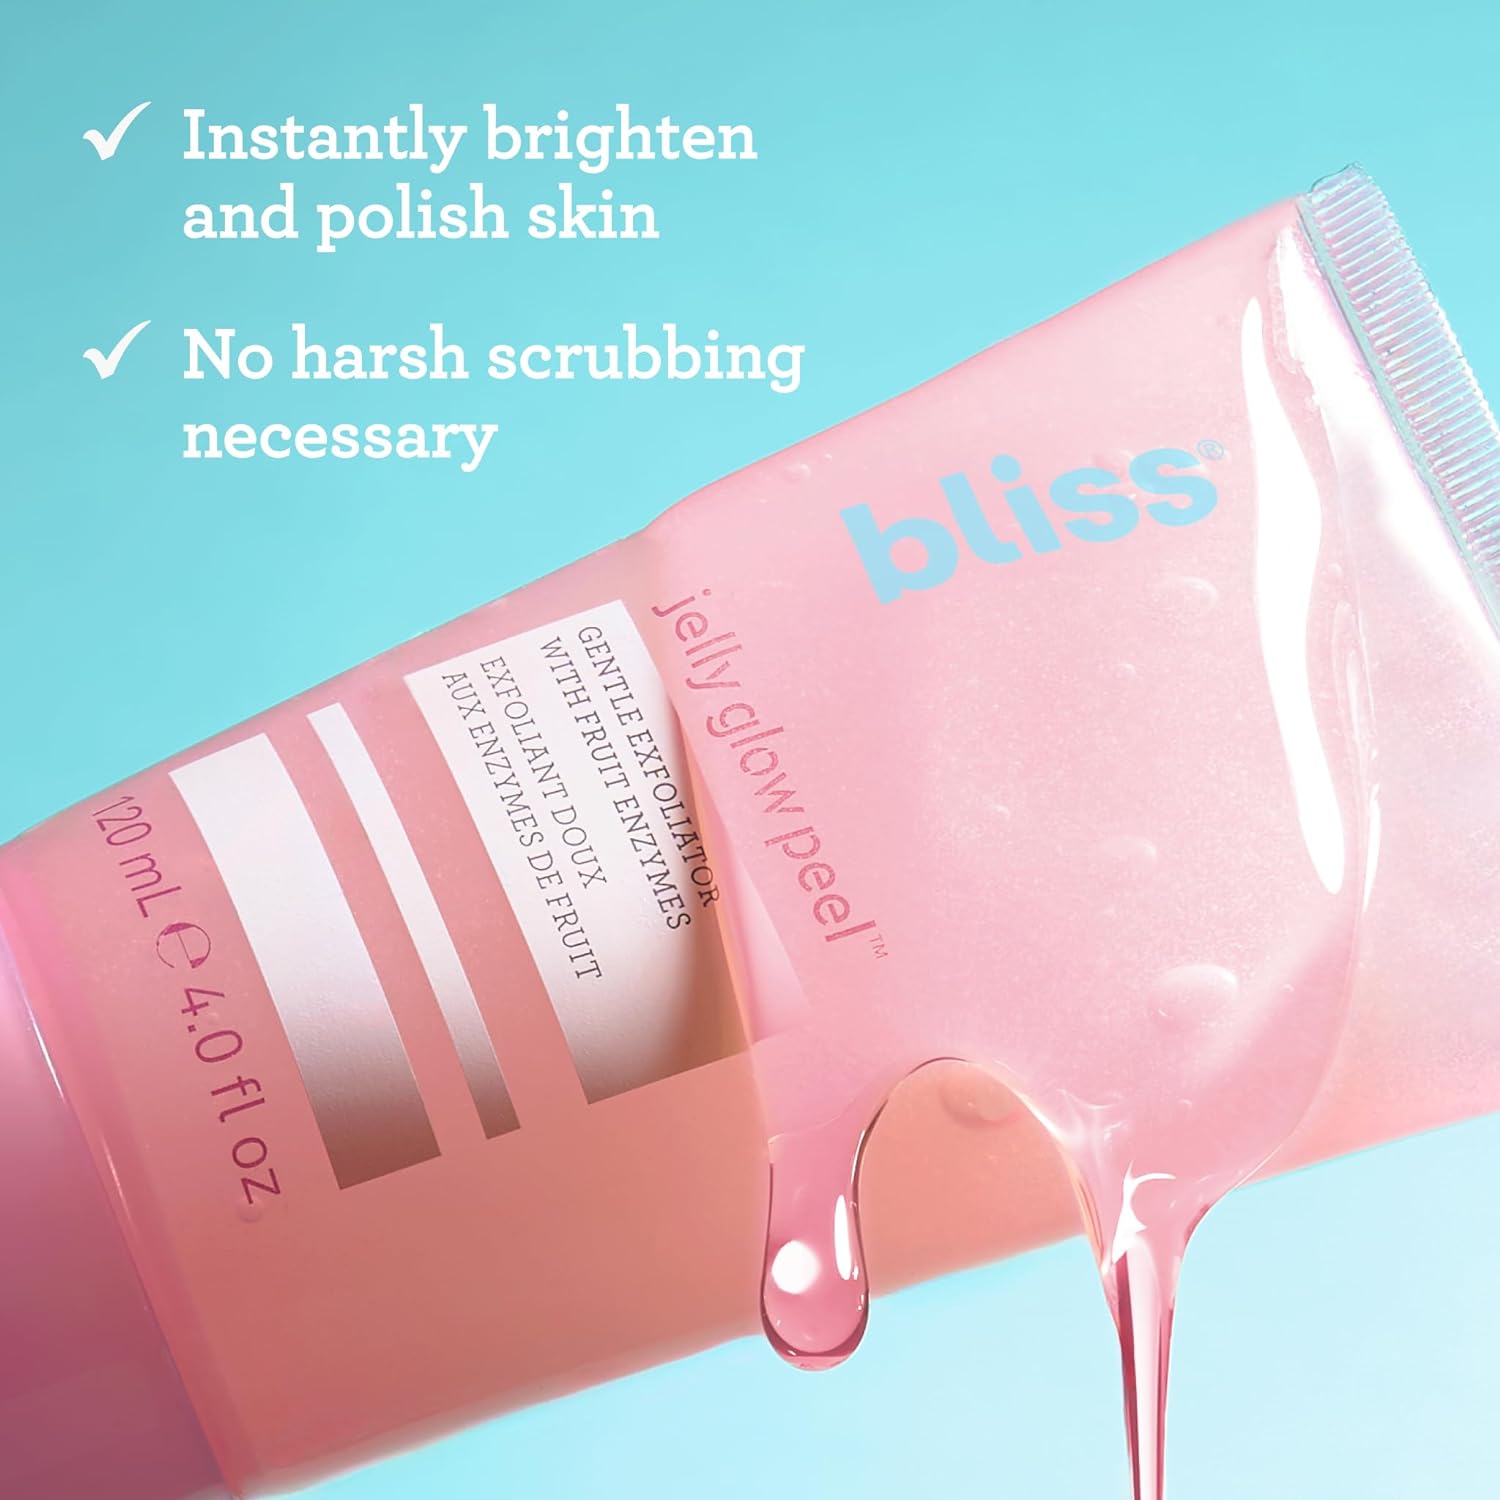 Bliss Jelly Glow Peel™ Exfoliator + Disappearing Act Niacinamide Toner | Clean | Cruelty Free | Paraben Free : Beauty & Personal Care